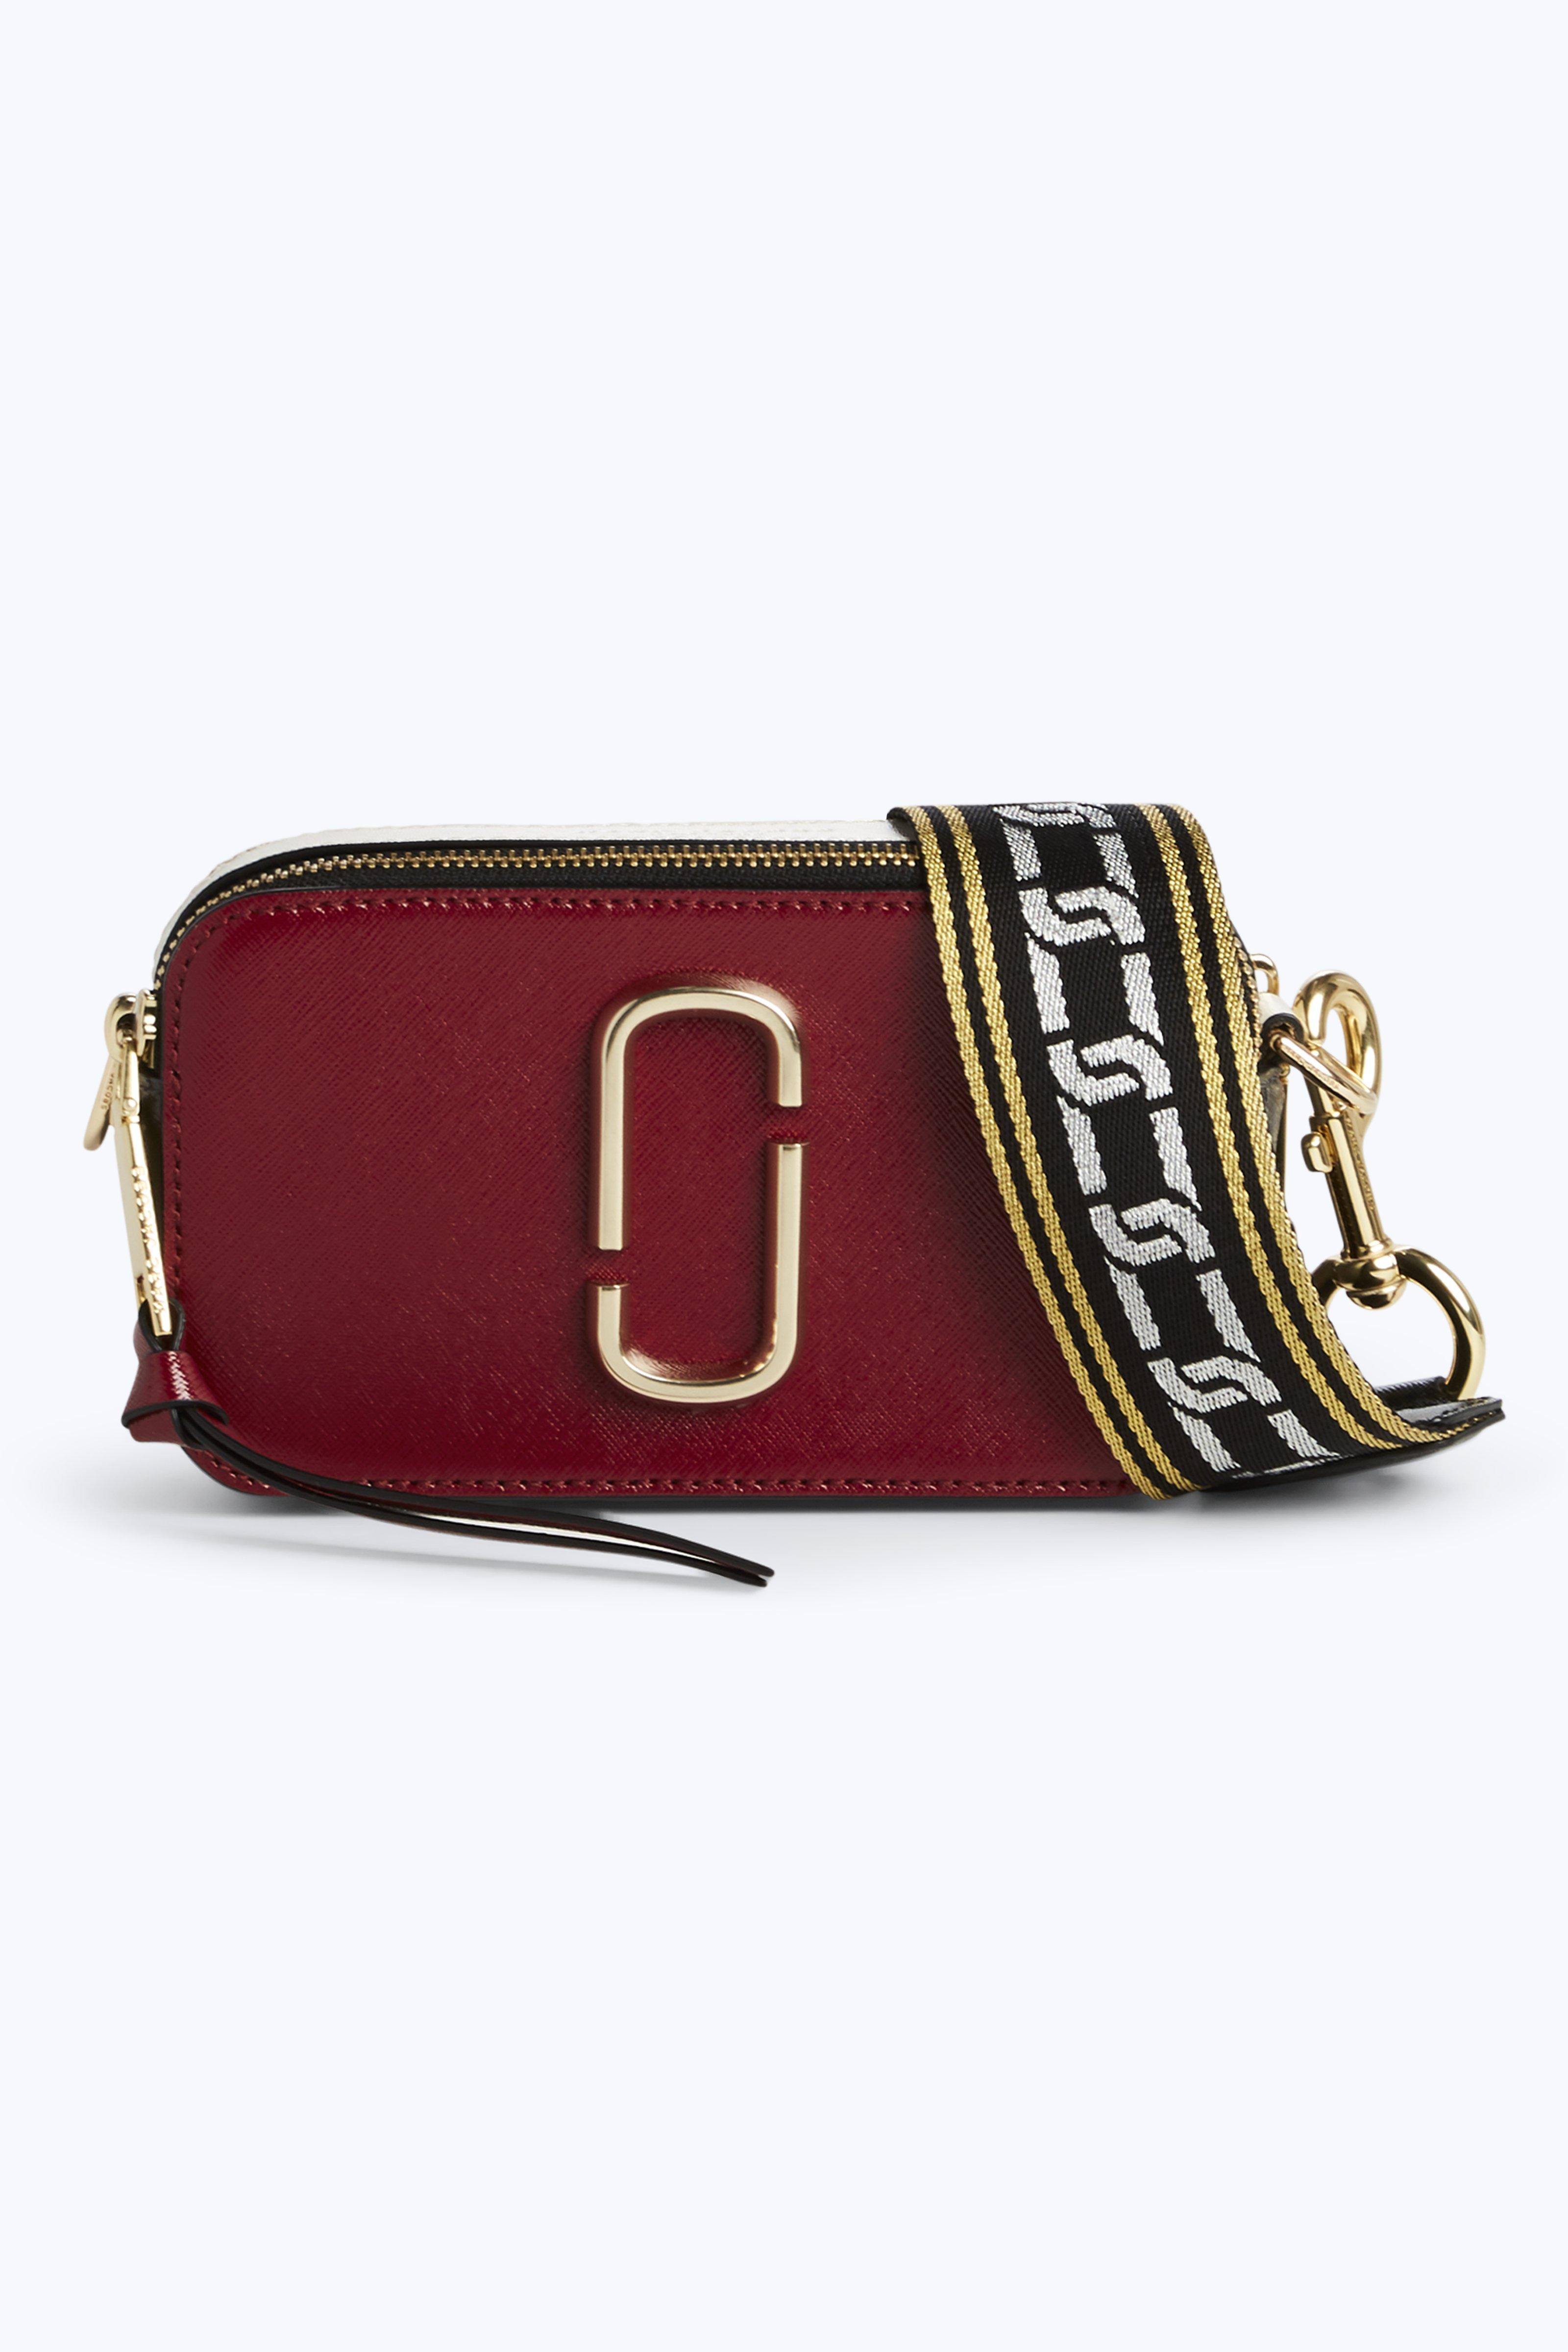 Marc Jacobs Snapshot Small Camera Bag - Lyst